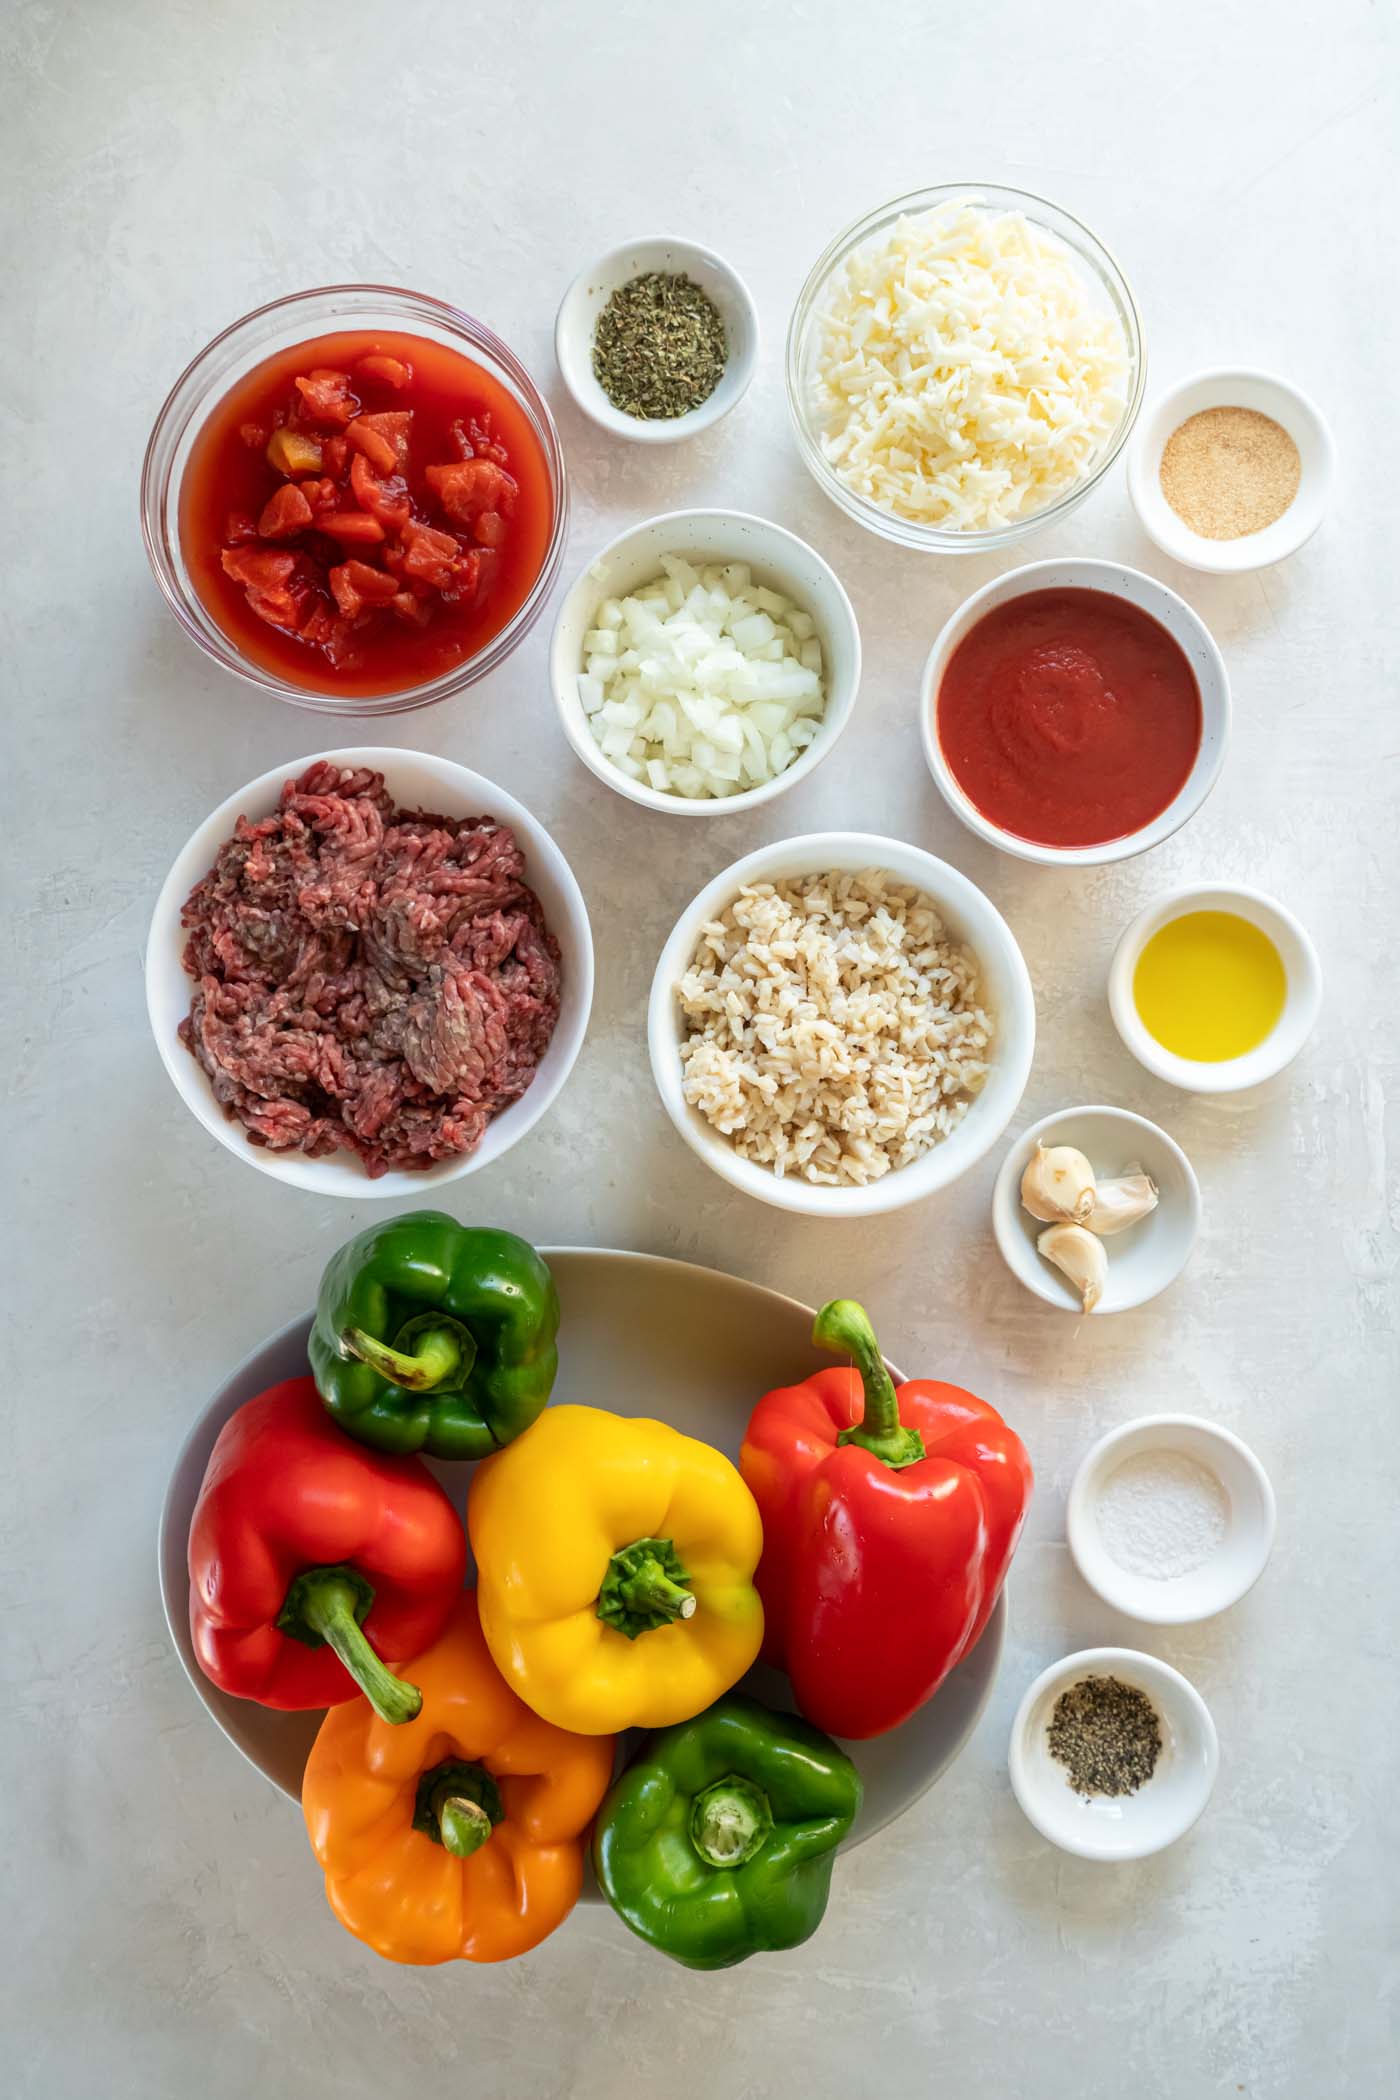 Ingredients for stuffed peppers recipe.